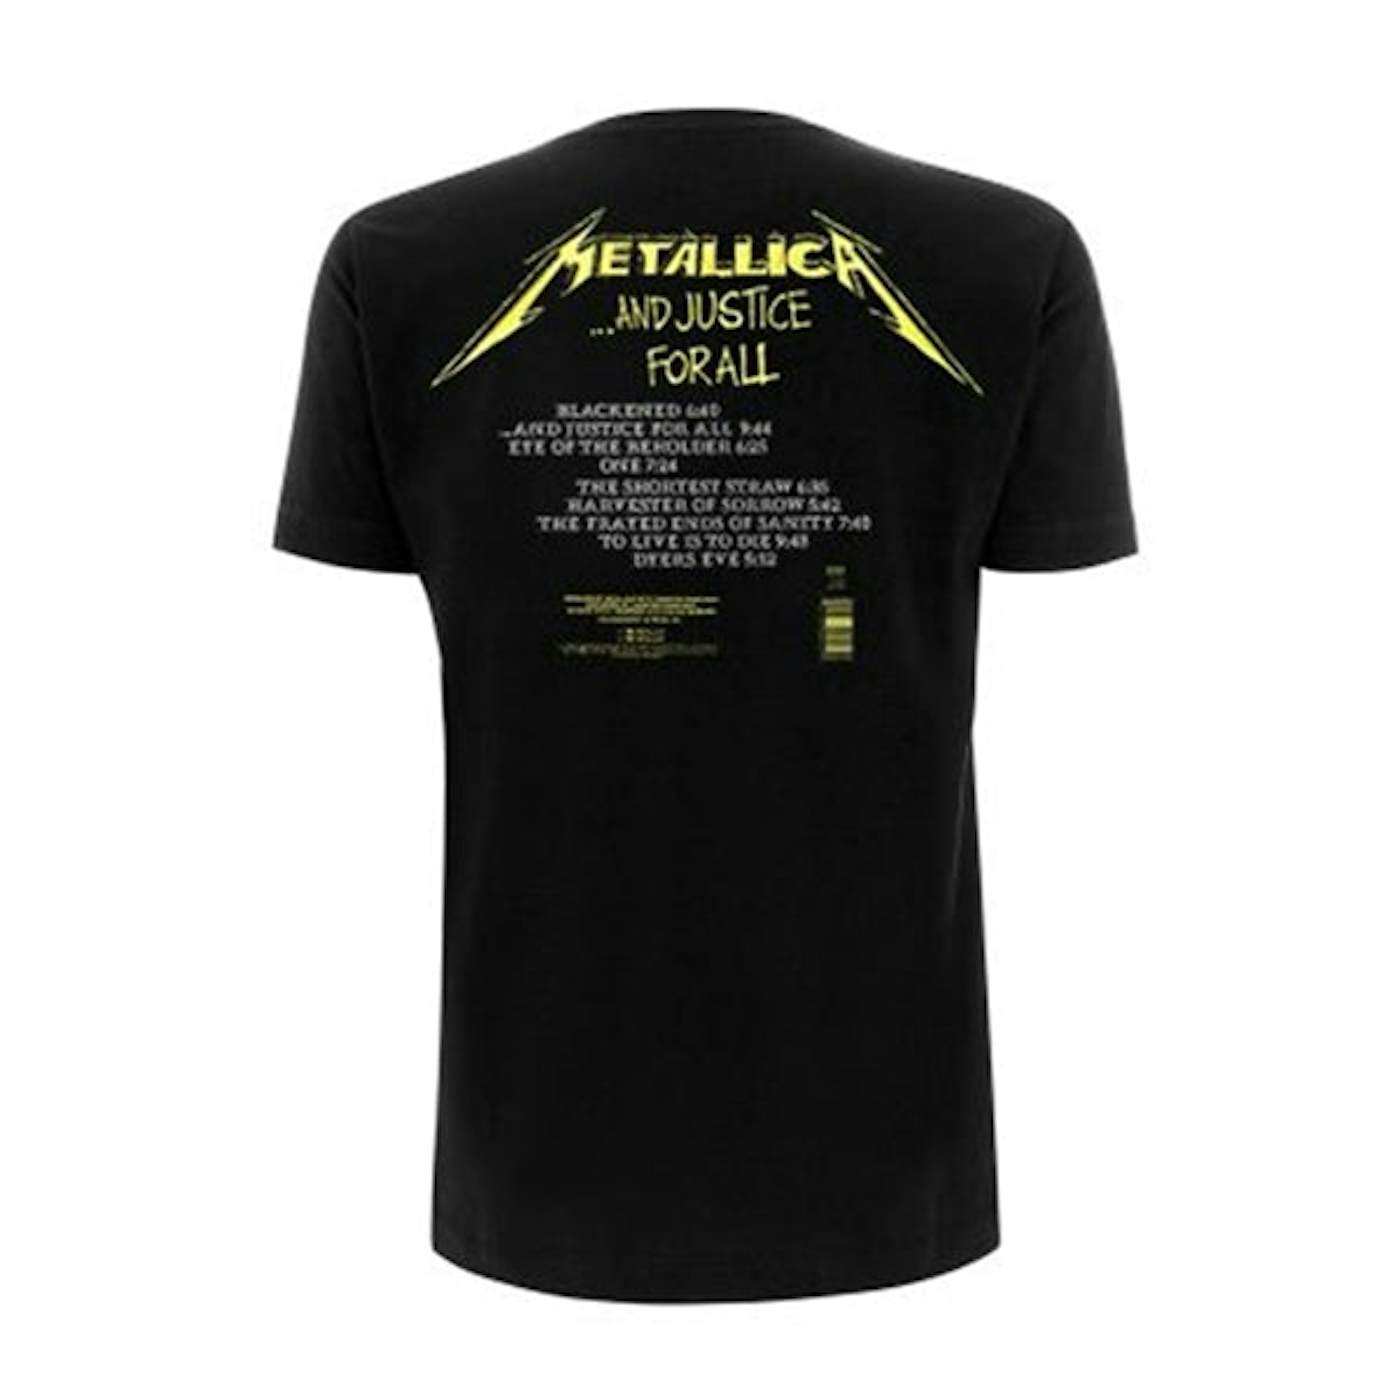 Metallica T Shirt - And Justice For All Tracks